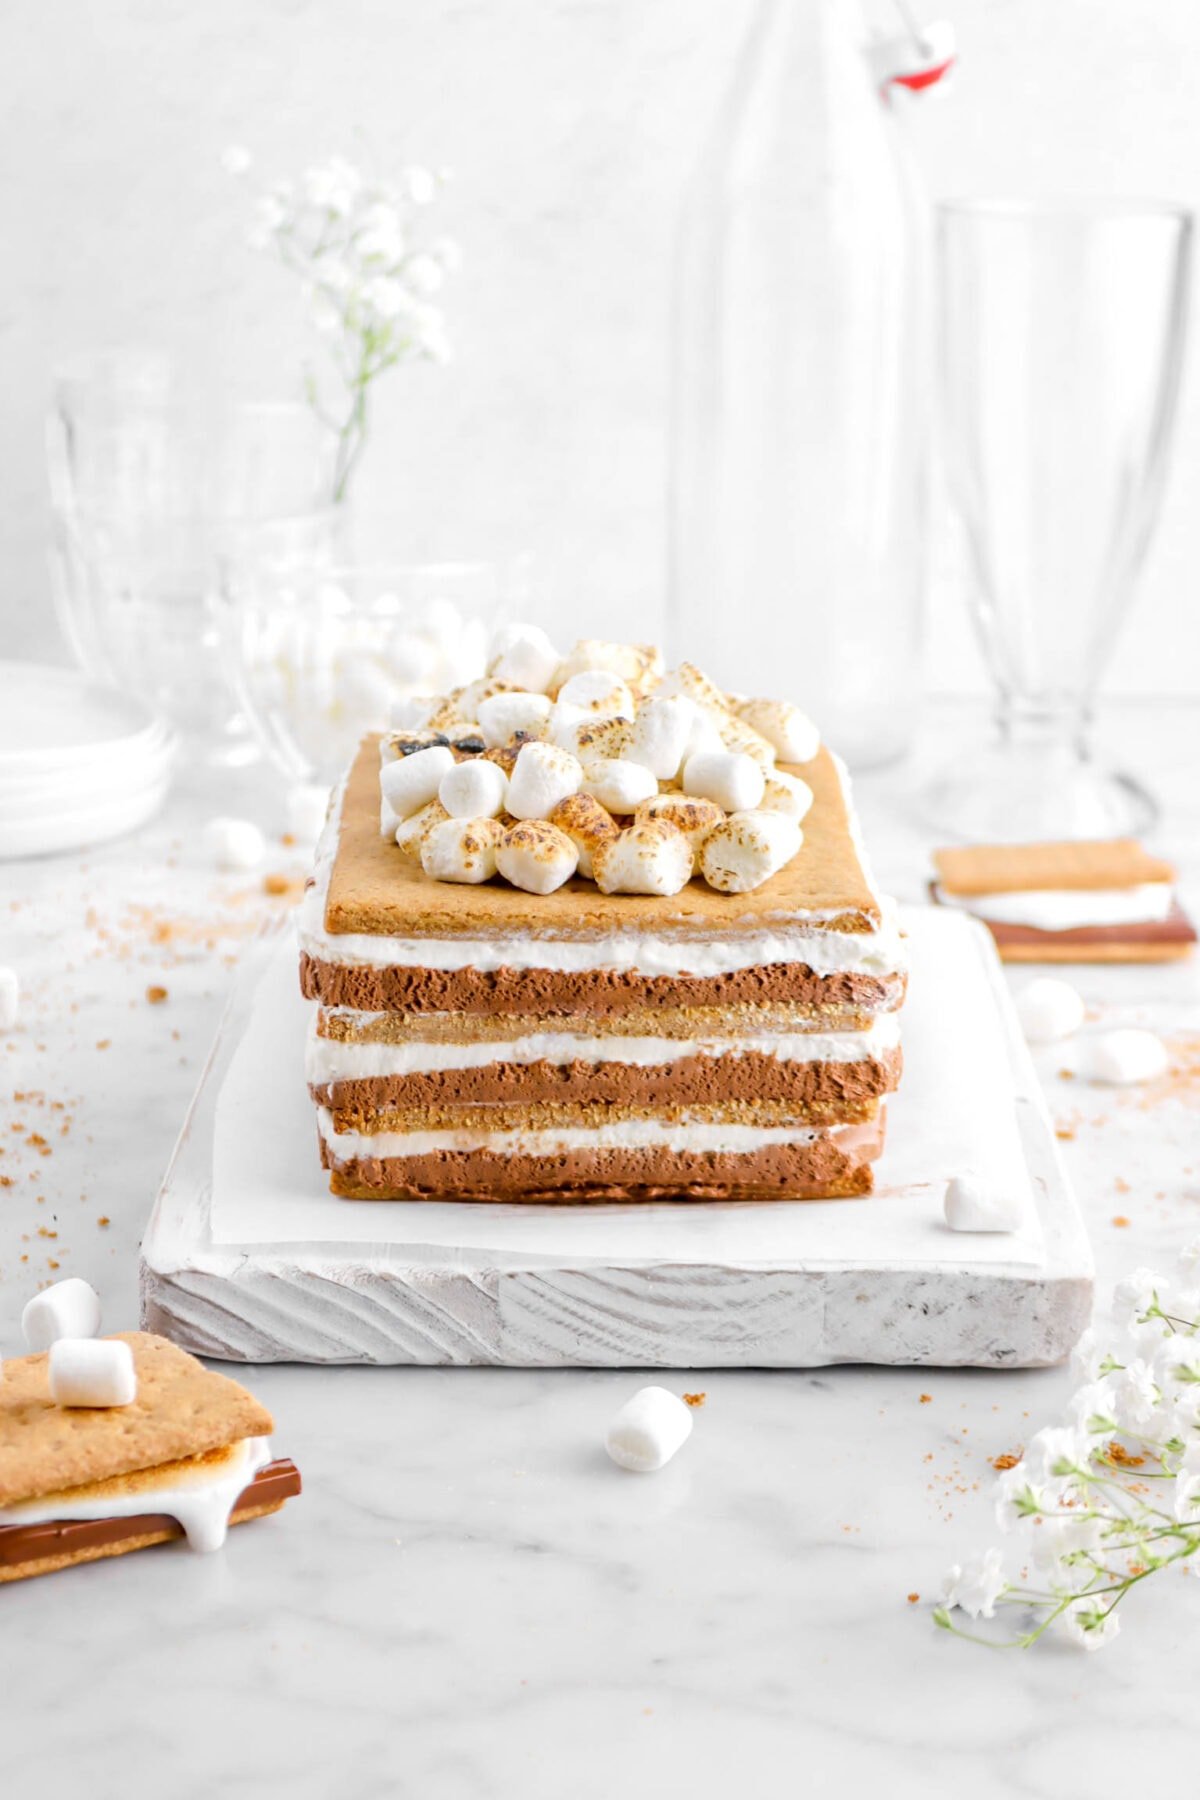 s'mores icebox cake with two s'mores beside, mini marshmallows toasted on top, empty glasses behind, with graham cracker crumbs and mini marshmallows scattered around on marble surface